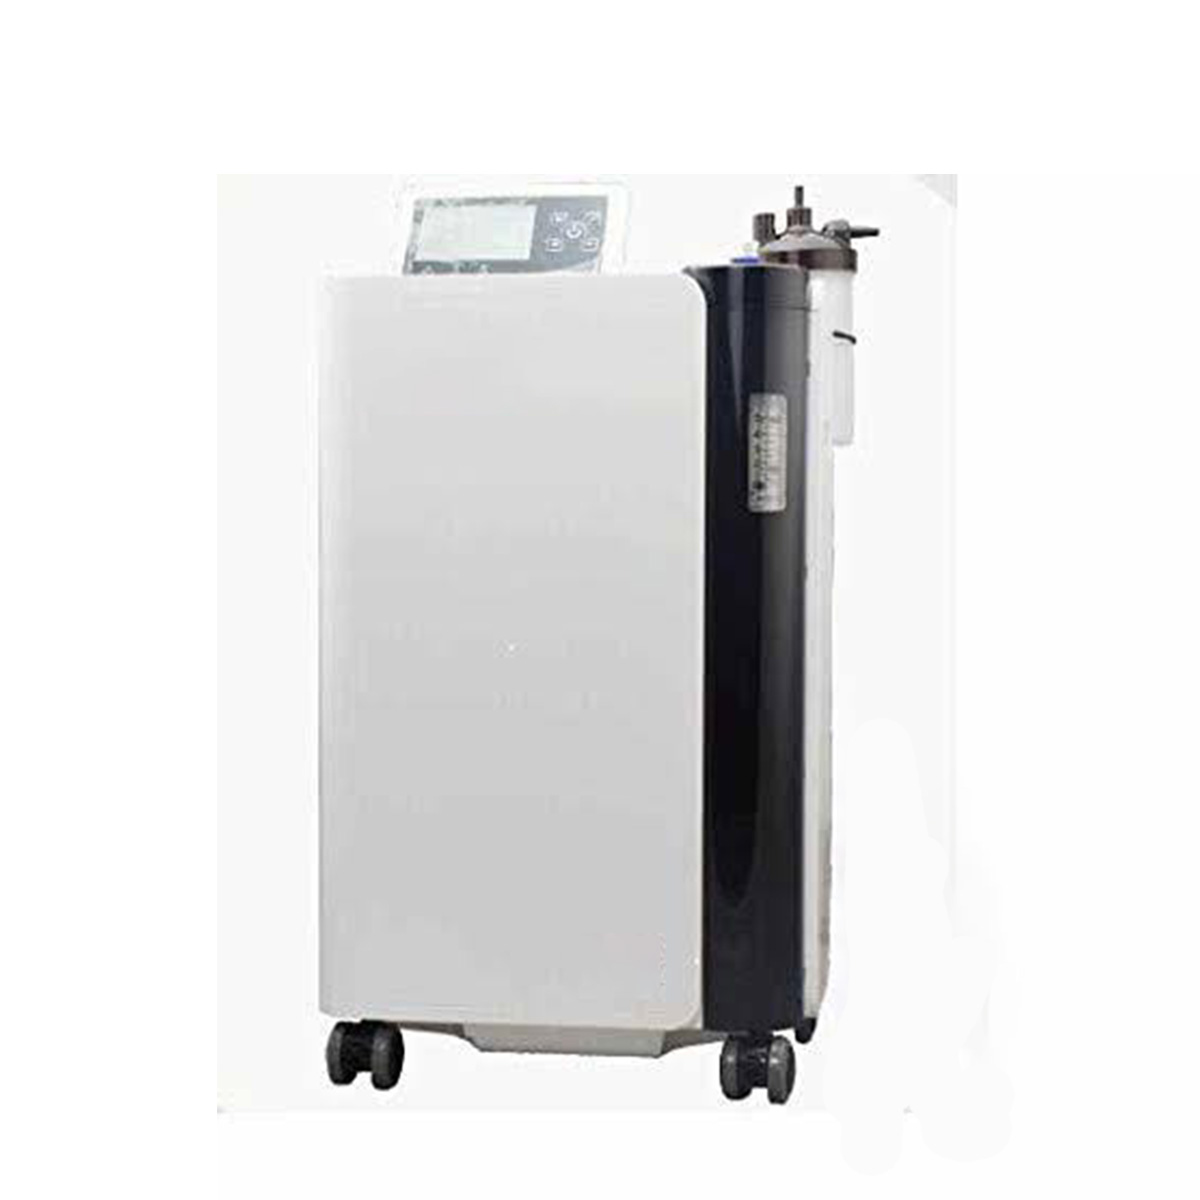 5 Lpm Oxymed Oxygen Concentrator On Sale Suppliers, Service Provider in Akshardham